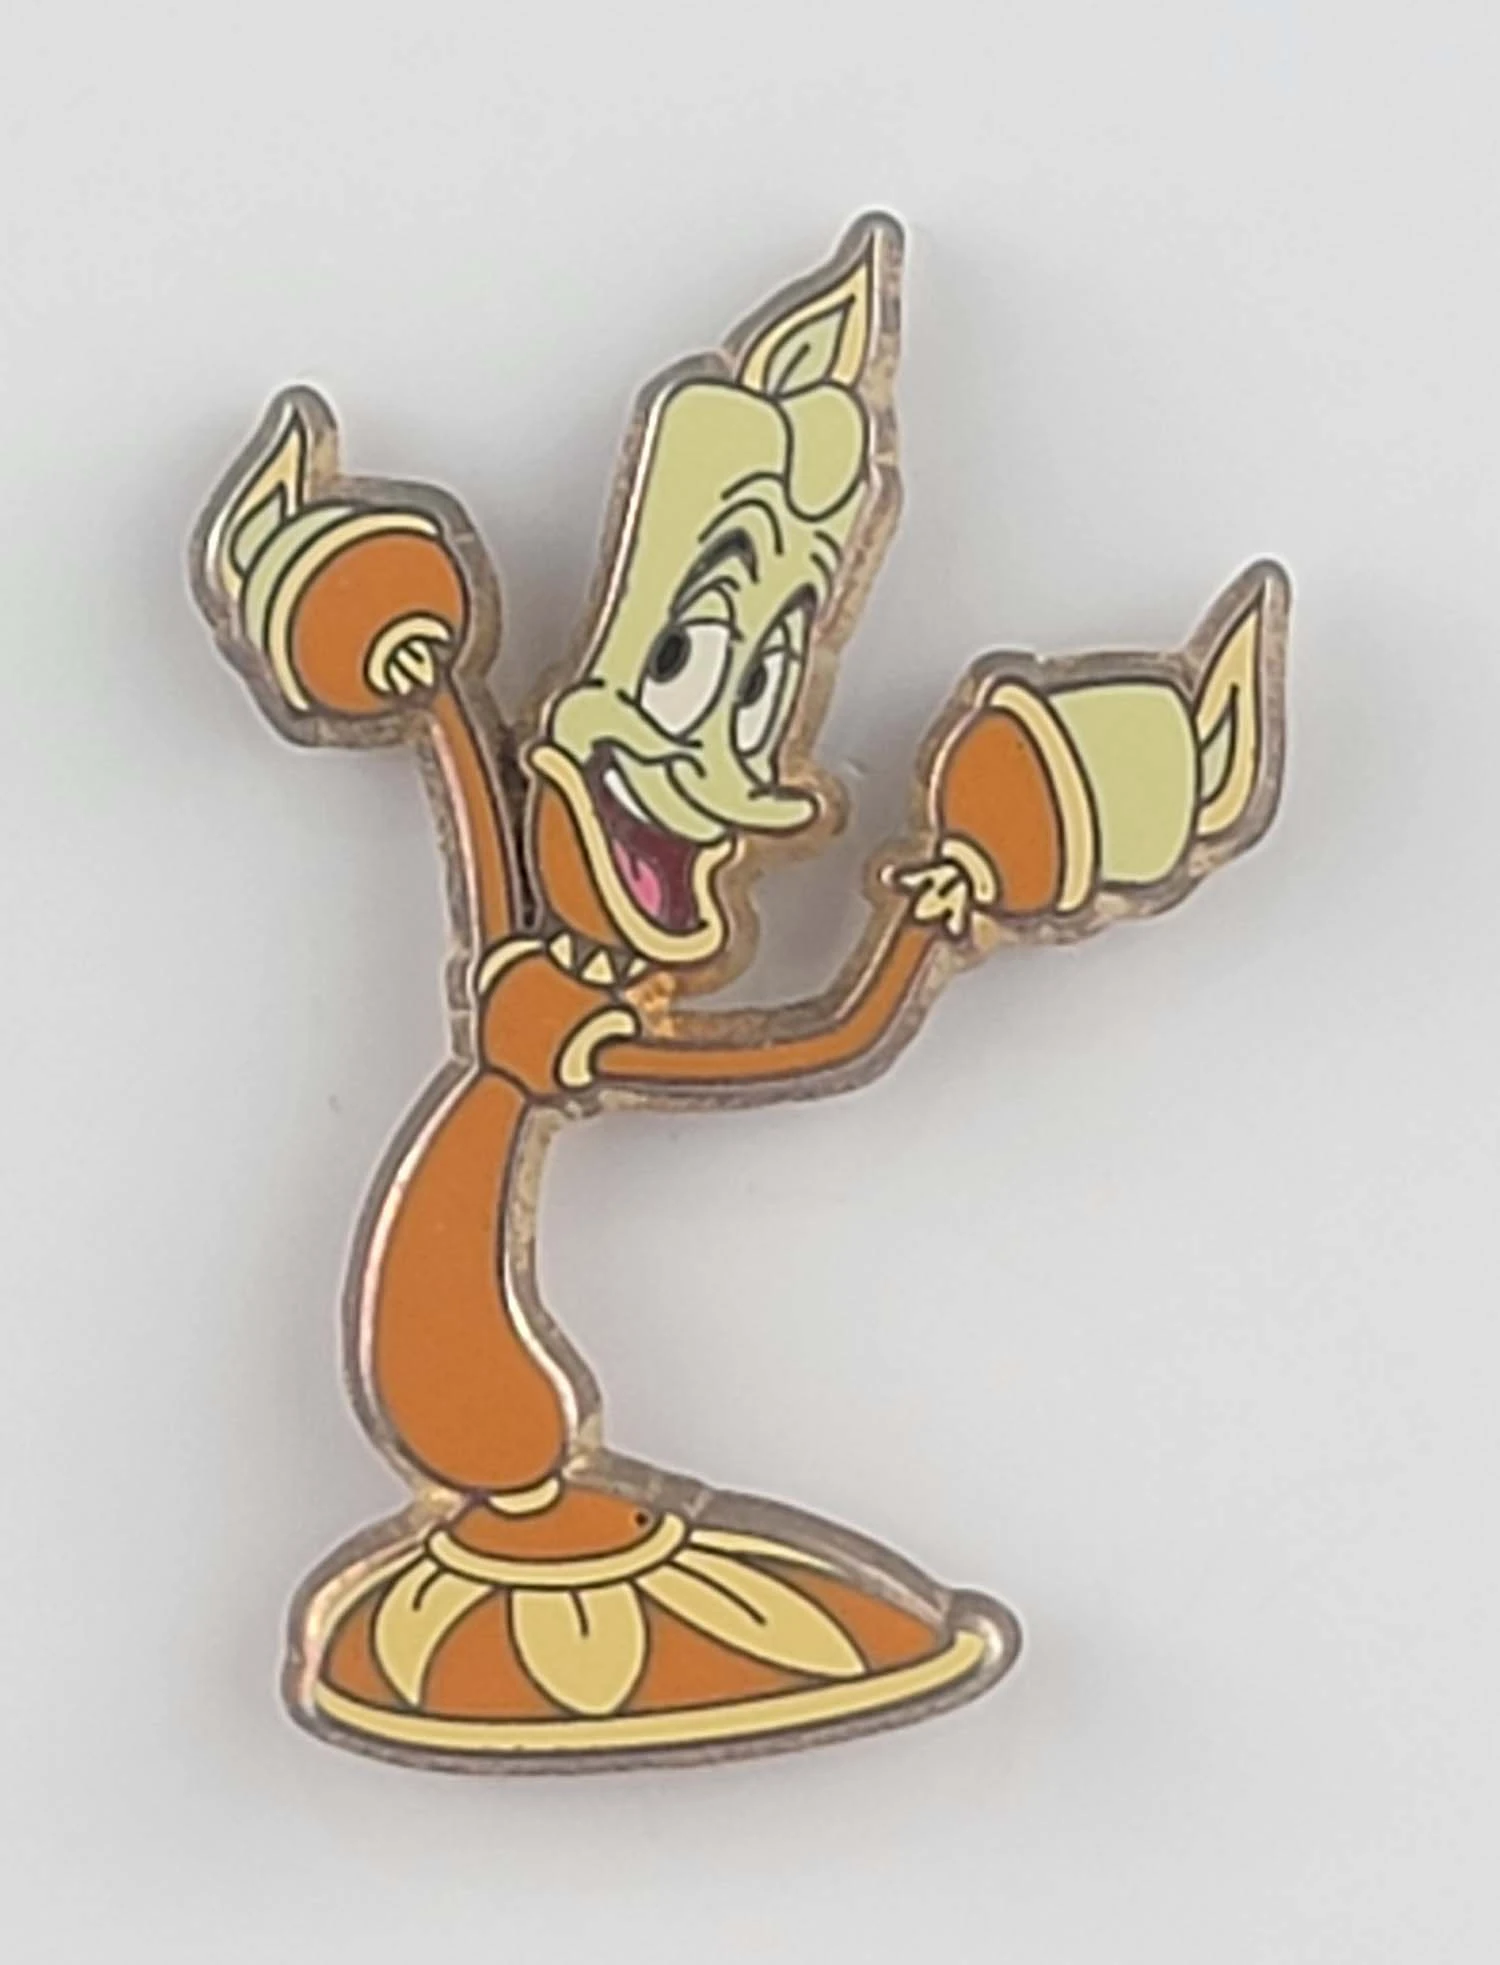 item Disney Pin - Beauty and The Beast - Lumiere 91680L